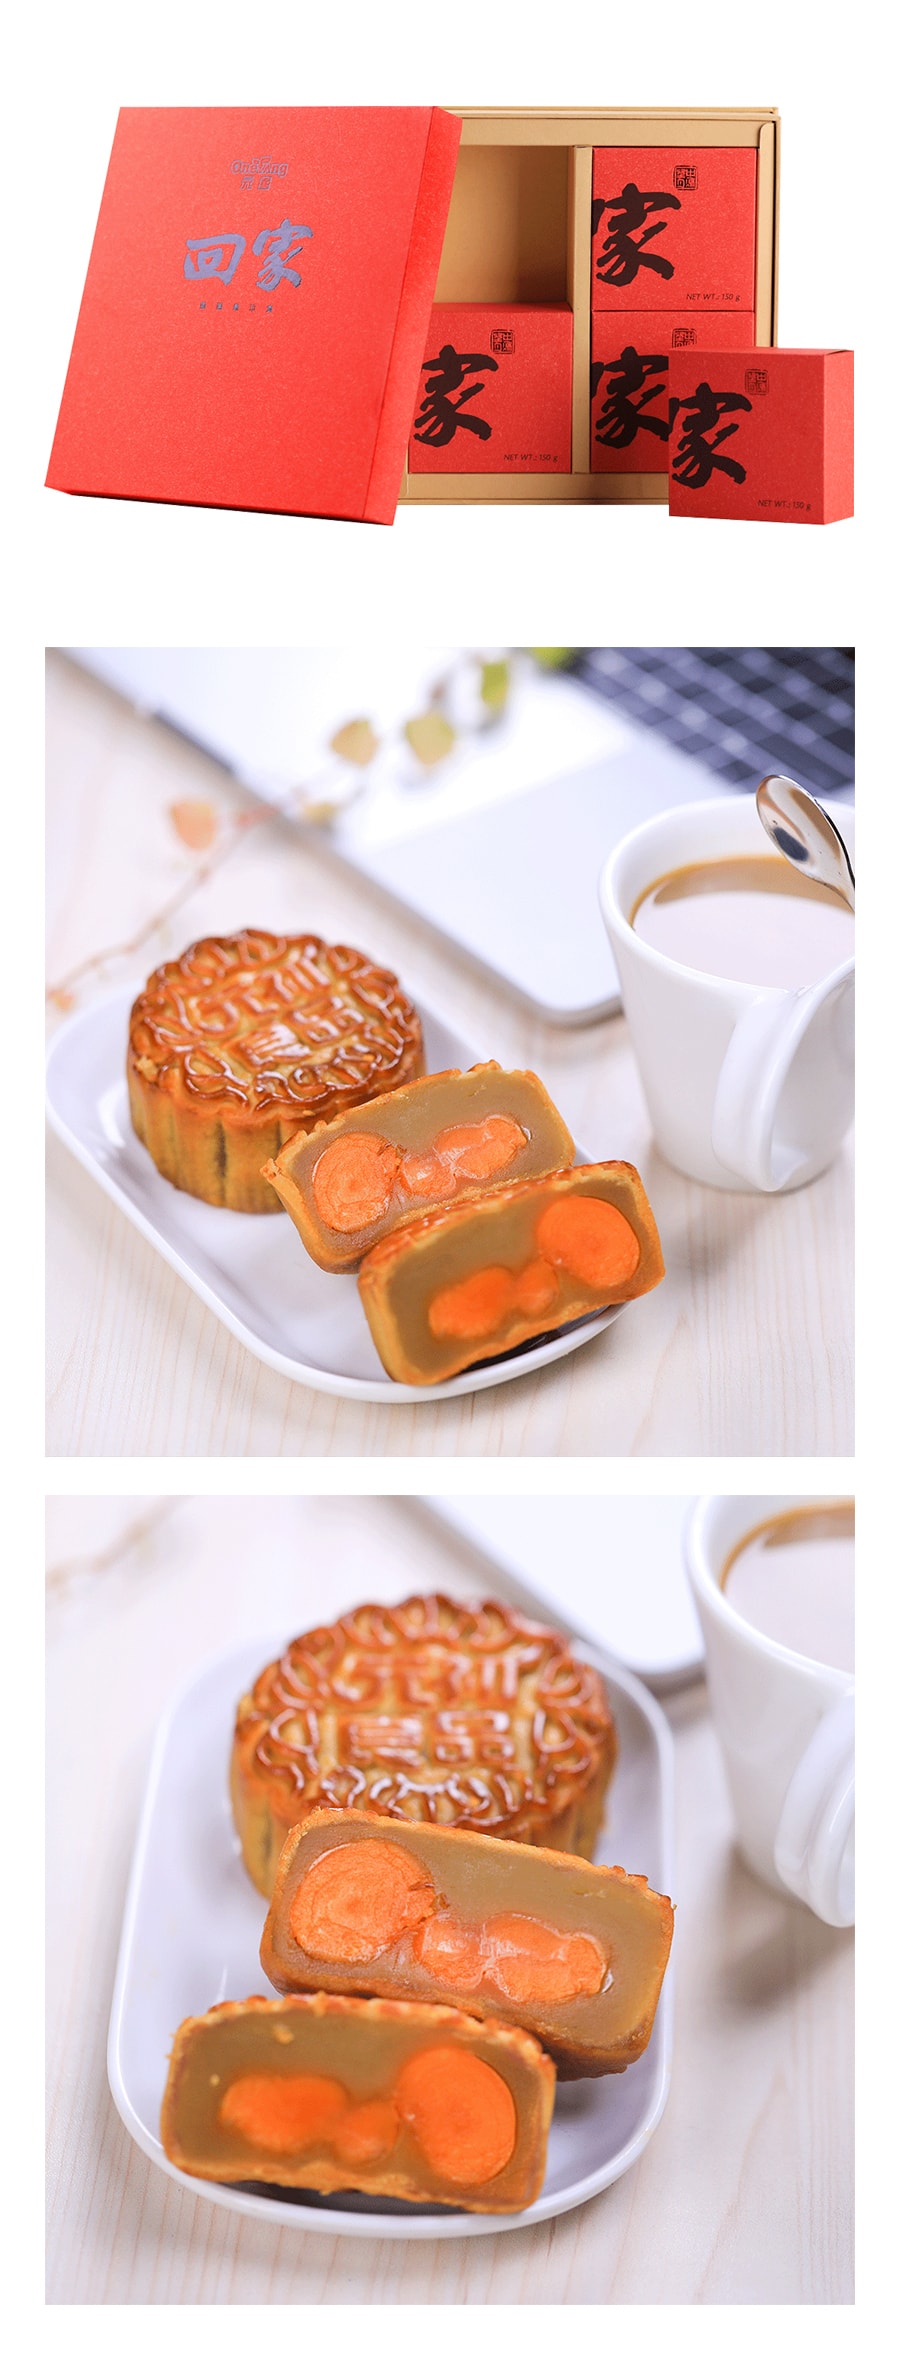 ONETANG Moon Cake Double Salted Egg Yolks & Chestnut Flavor 600g 【Delivery Date: End of August】